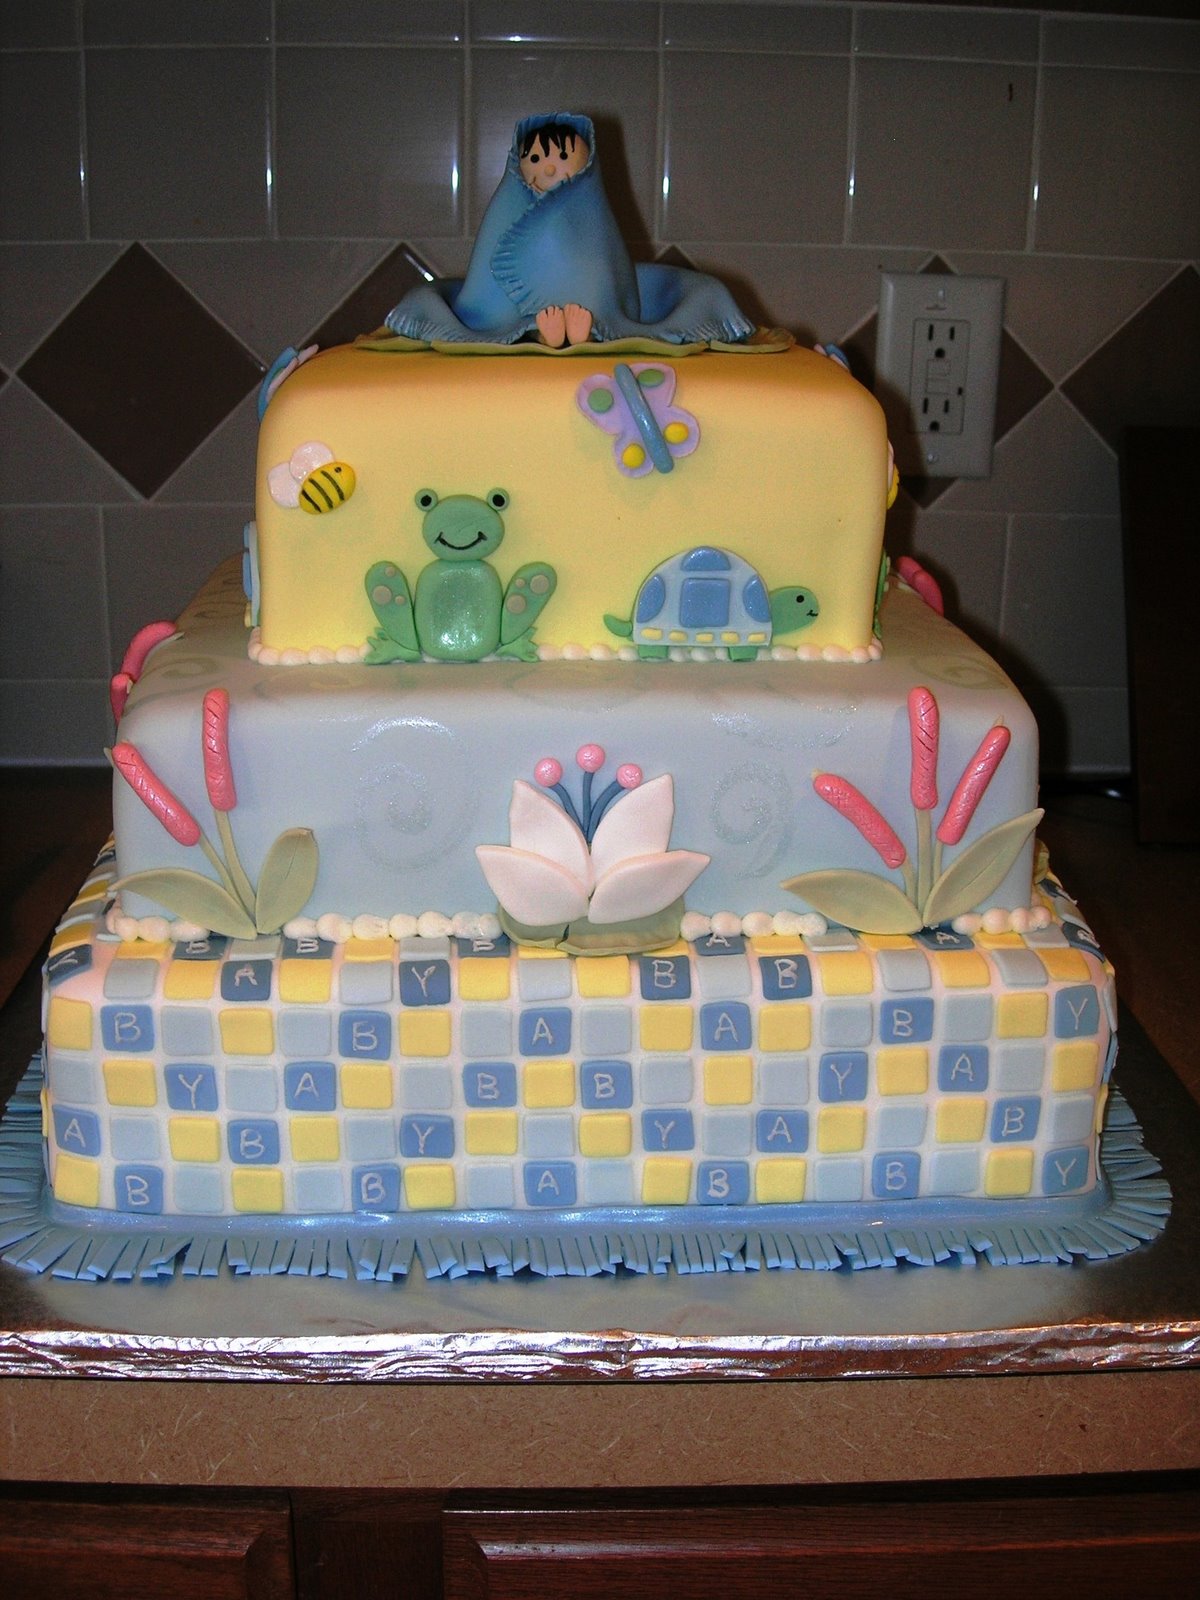 Baby Shower Cakes